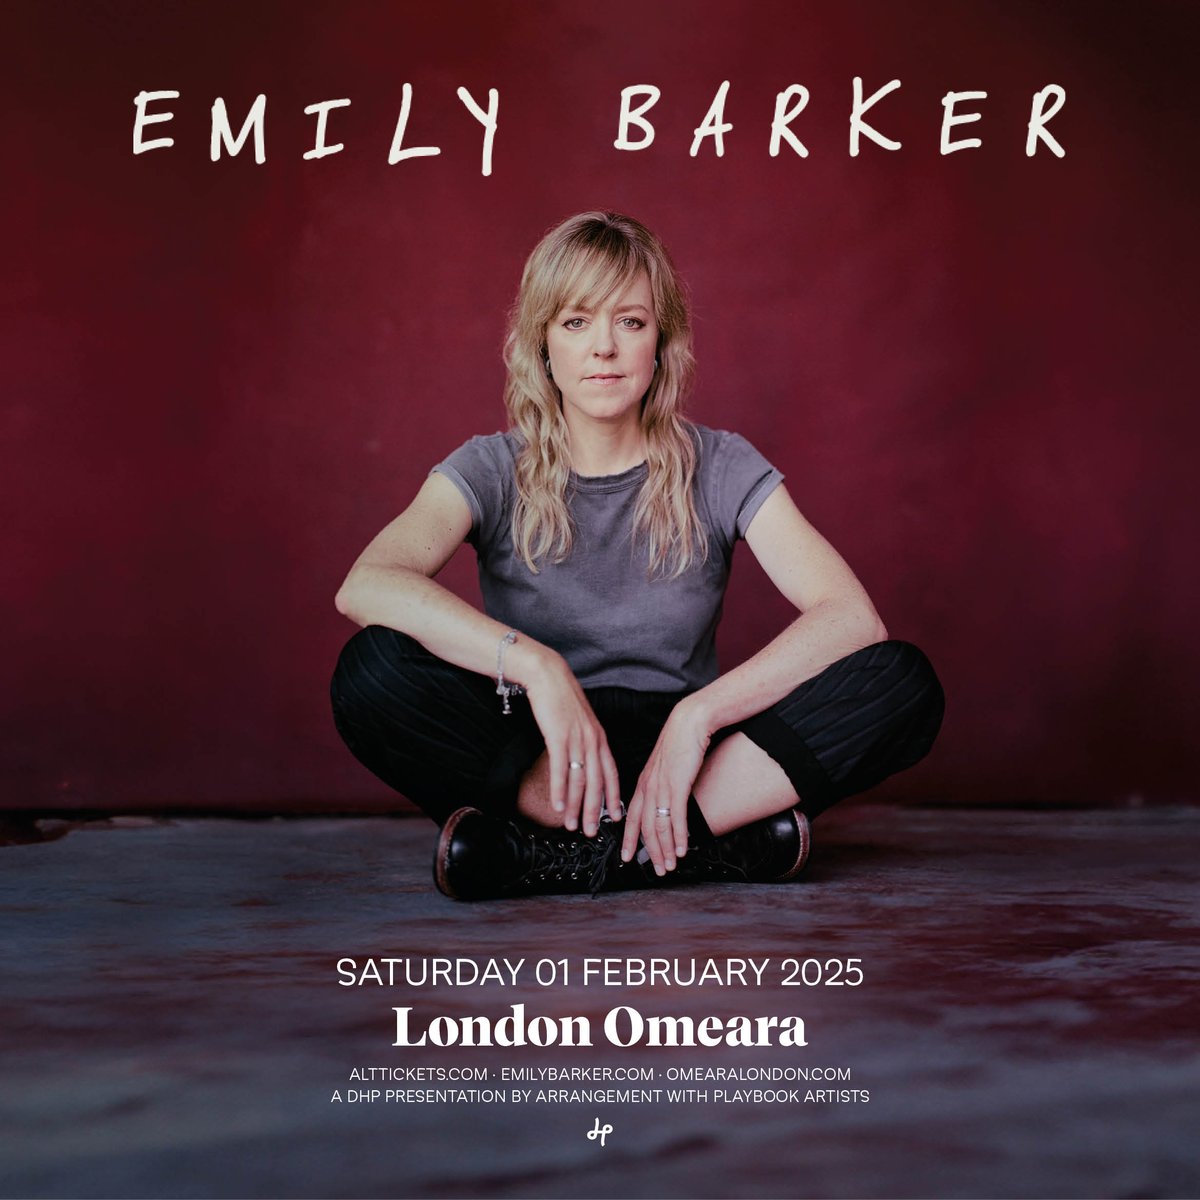 NEW/ With her new album, 'Fragile as Humans', coming out tomorrow, @emilybarkerhalo has announced a show at @omearalondon on 1st February! Tickets go on sale tomorrow at 10am, set a reminder now: bit.ly/4bjGWVp